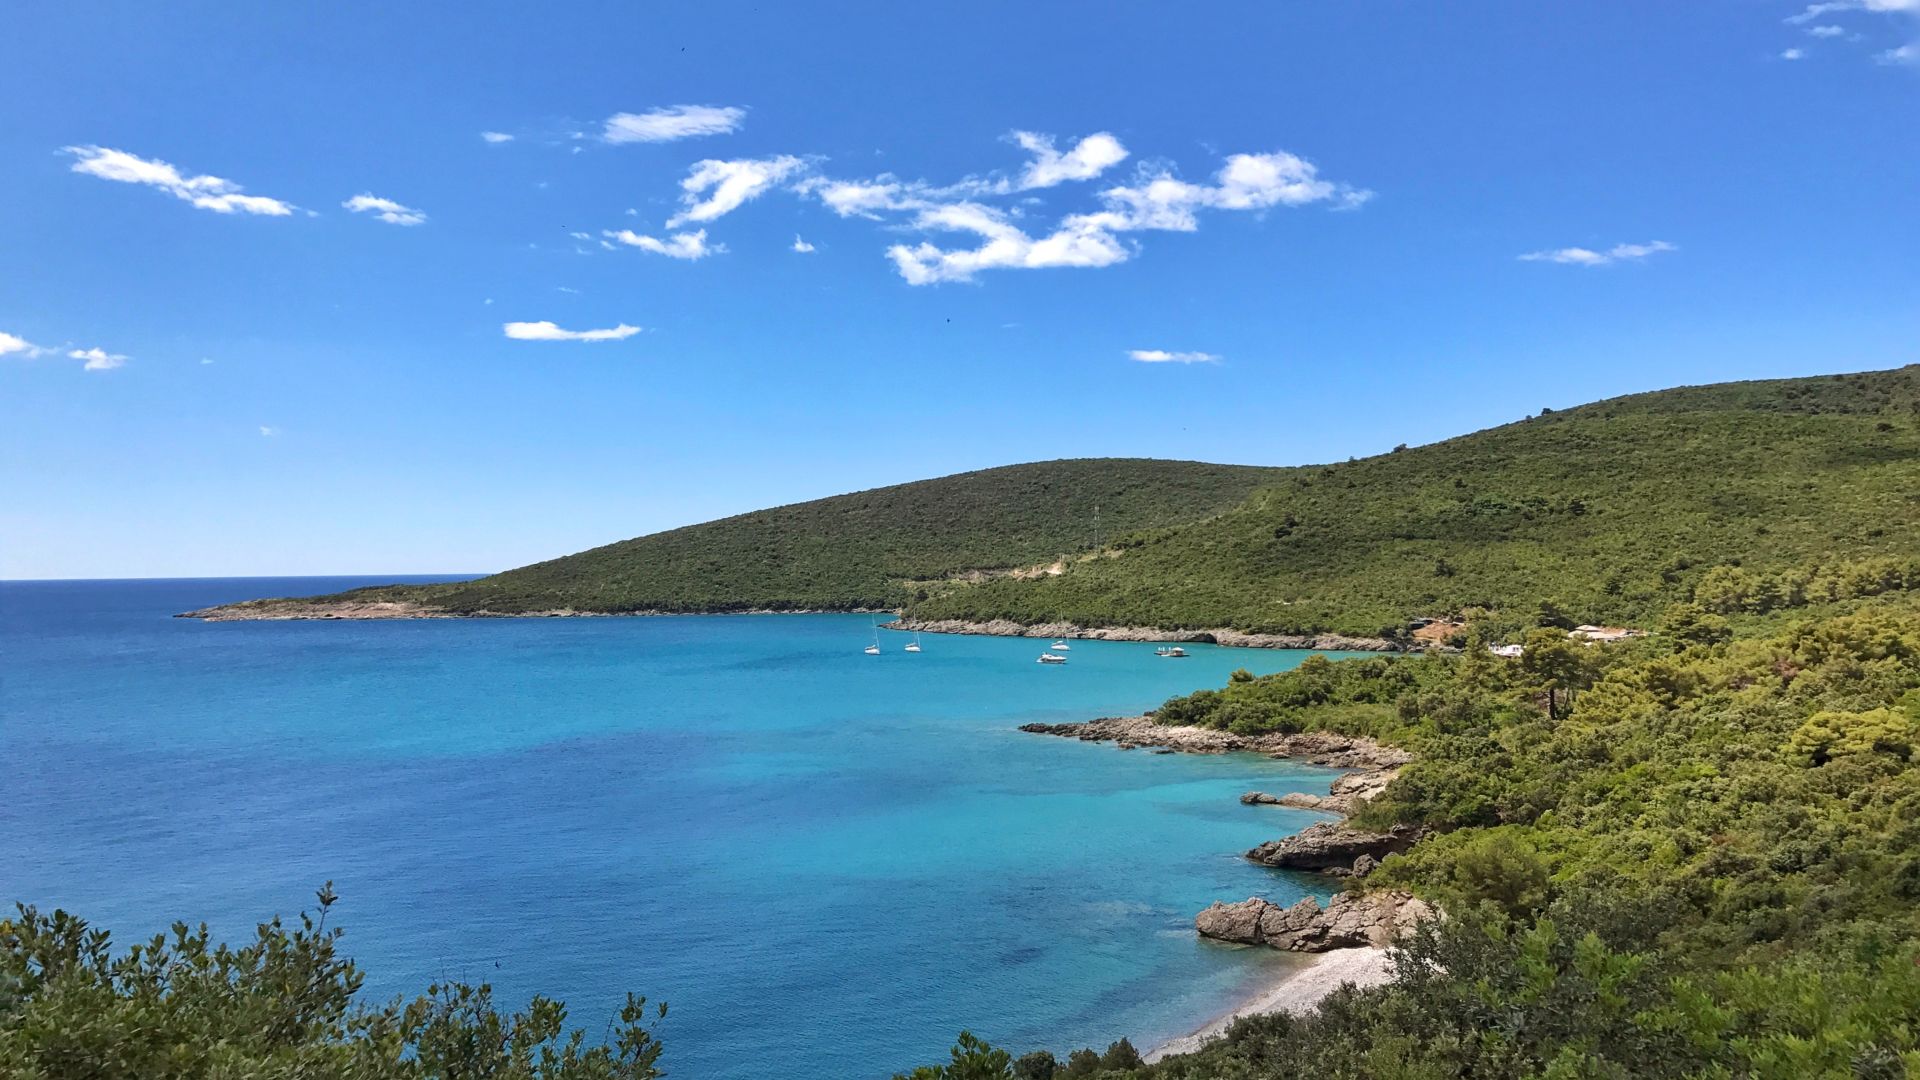 Green Mountains surround The Sea At Lustica Bay Peninsula